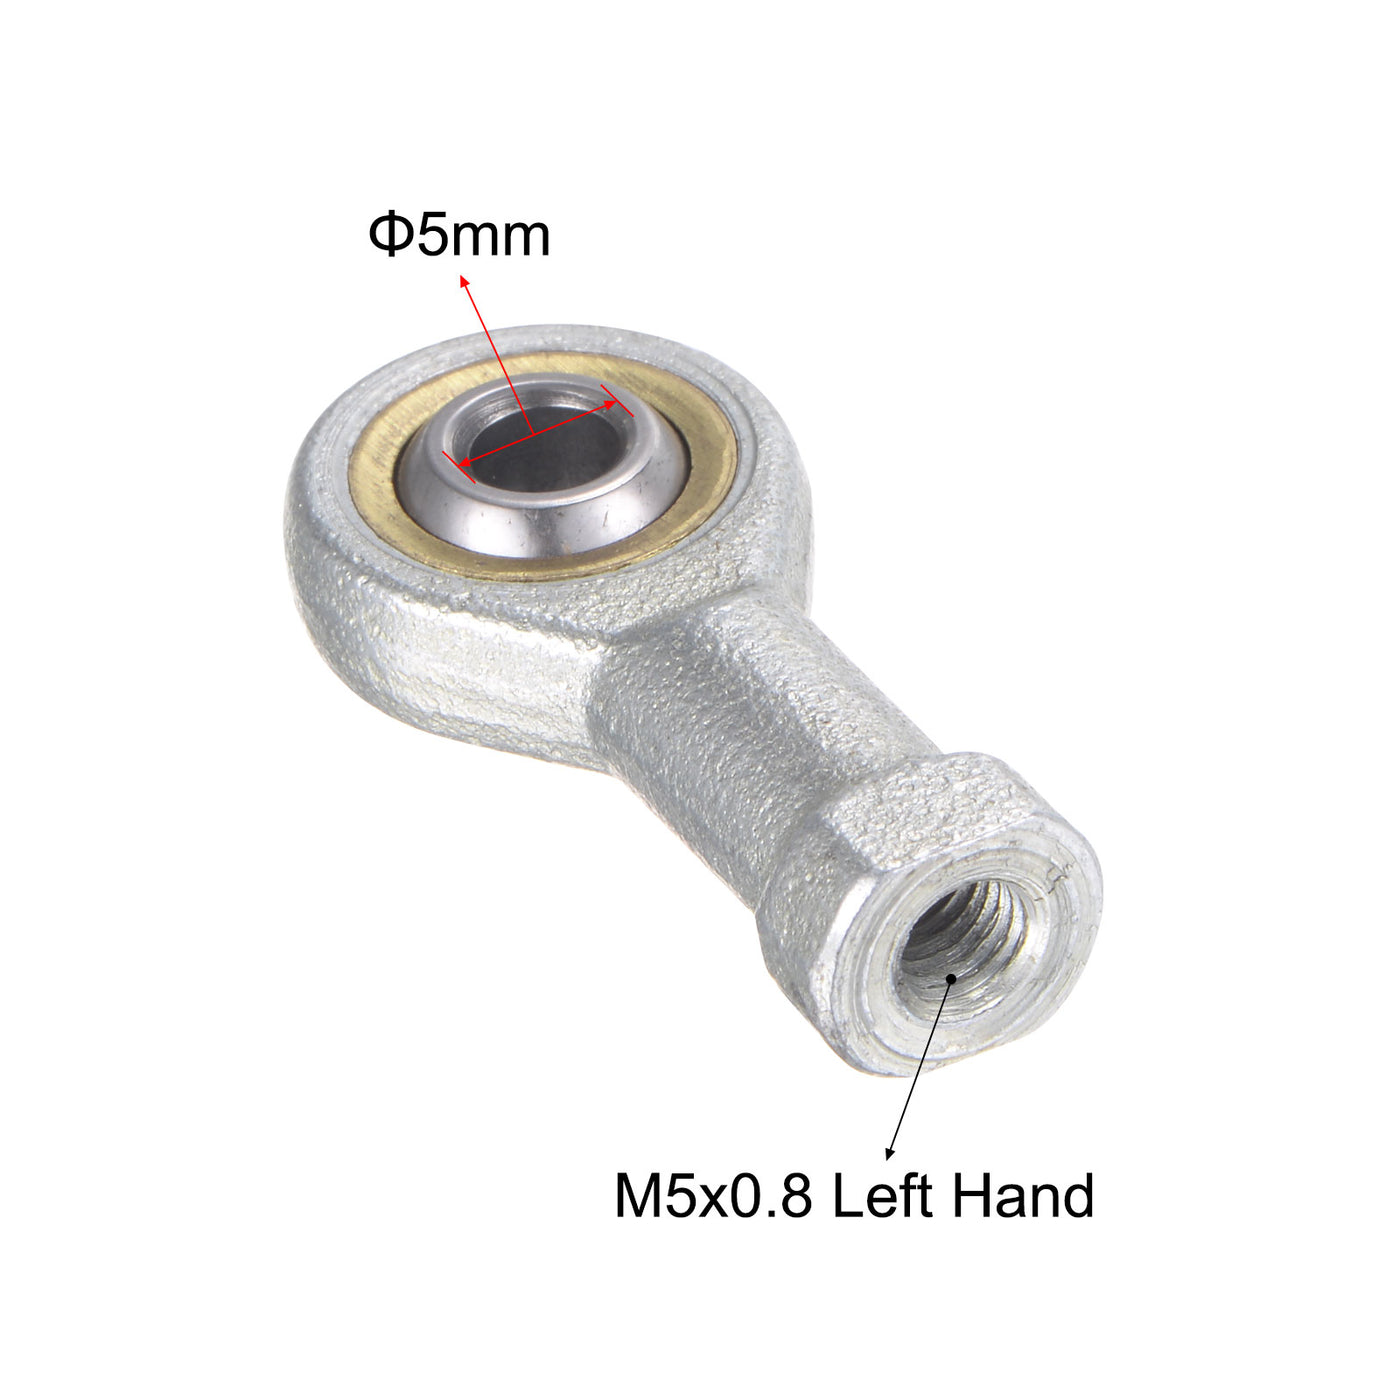 uxcell Uxcell SI5TK PHSA5 Rod End Bearing 5mm Bore M5x0.8 Left Hand Female Thread